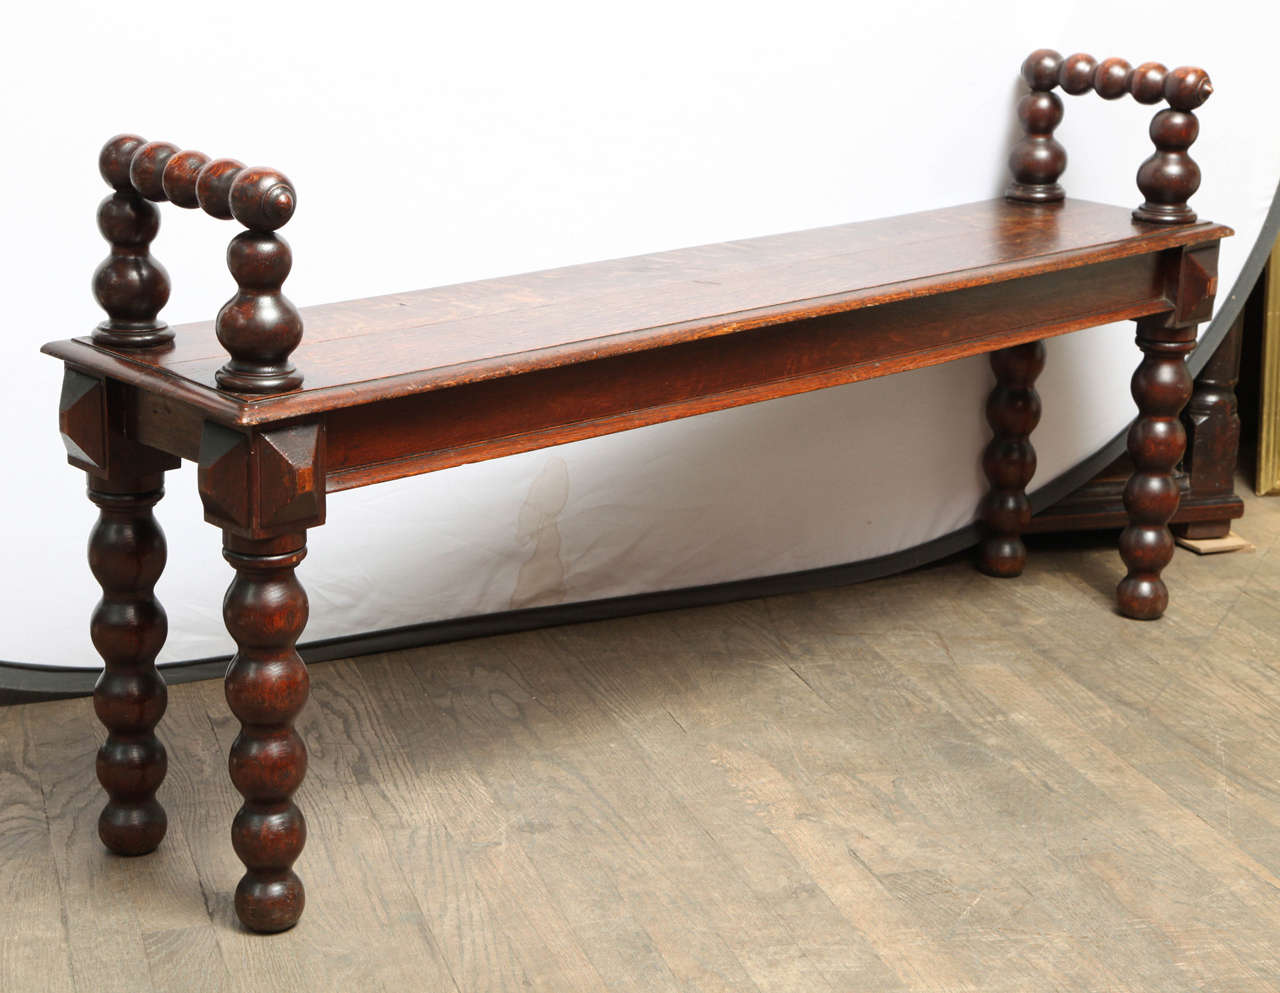 UK, circa 1880.

In excellent condition. Handmade in England by furniture makers in the Manchester area. Rare bobbin bench design.

Handpicked by buyers at Ann-Morris, Incorporation.